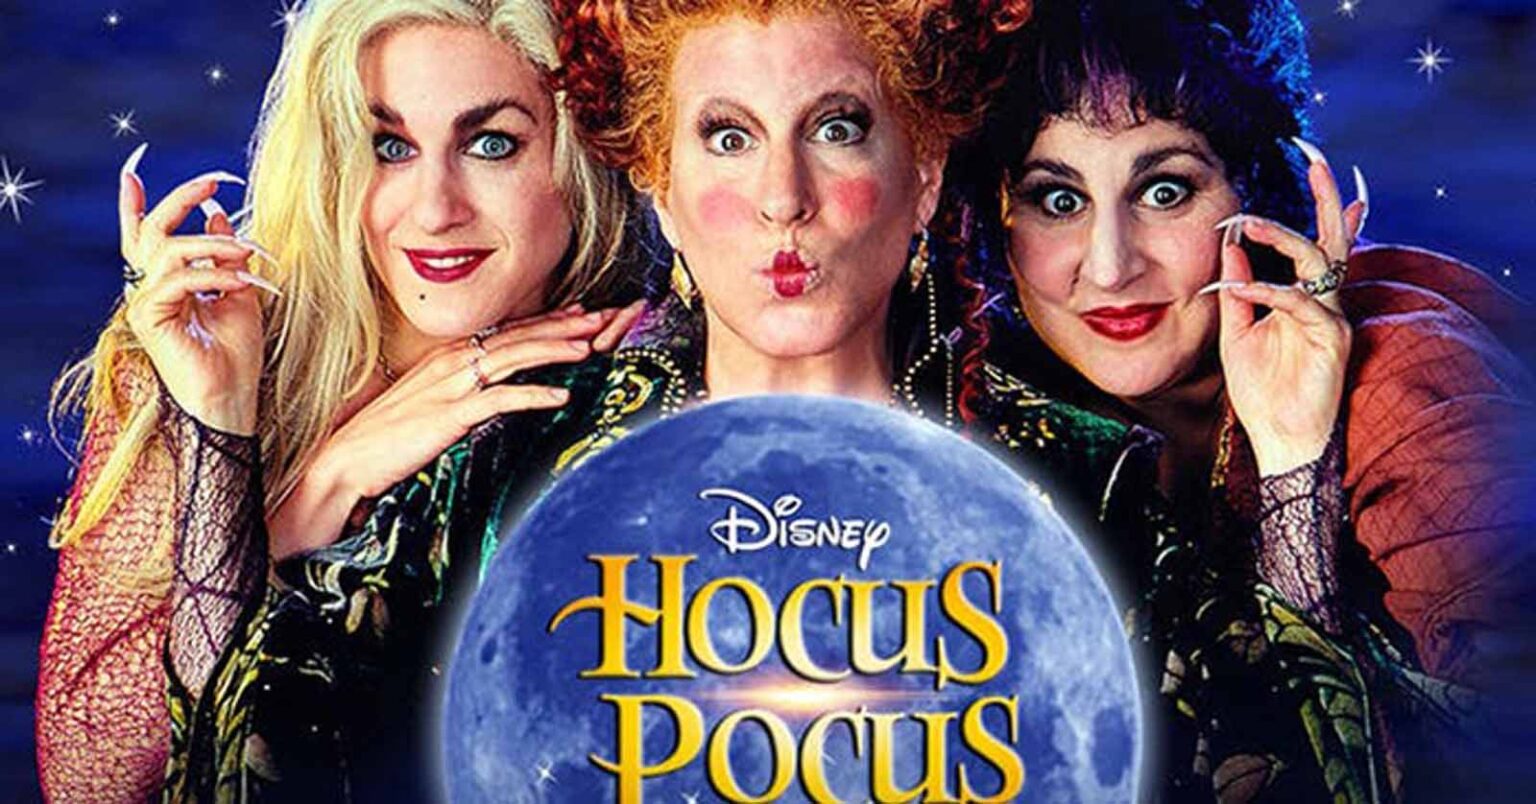 It's that time of year where 'Hocus Pocus' can be played on a loop and nobody will look at you funny. Can you guess which character said the quote?